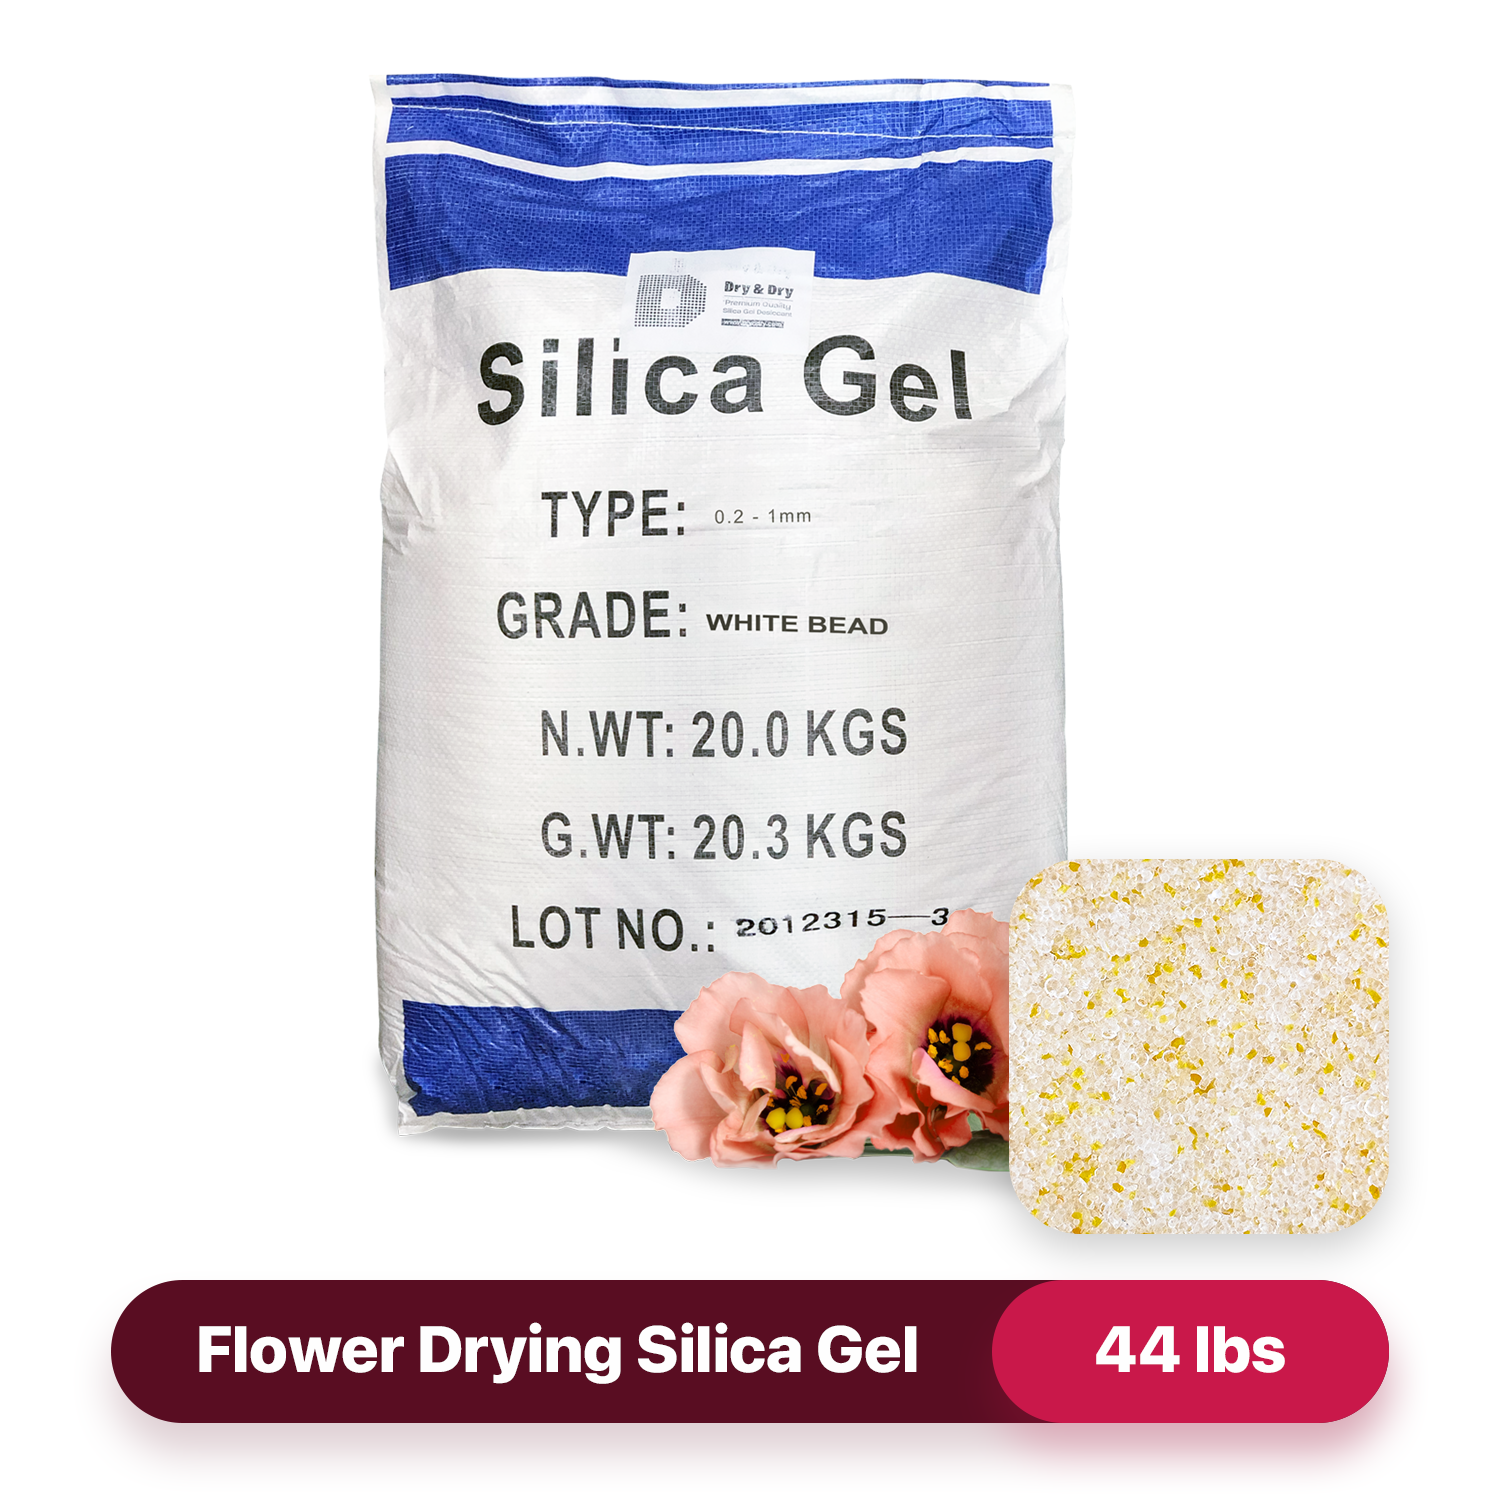 Dry & Dry Premium Orange Indicating Silica Gel for Flower Drying Desiccant - (Net 44 LBS)